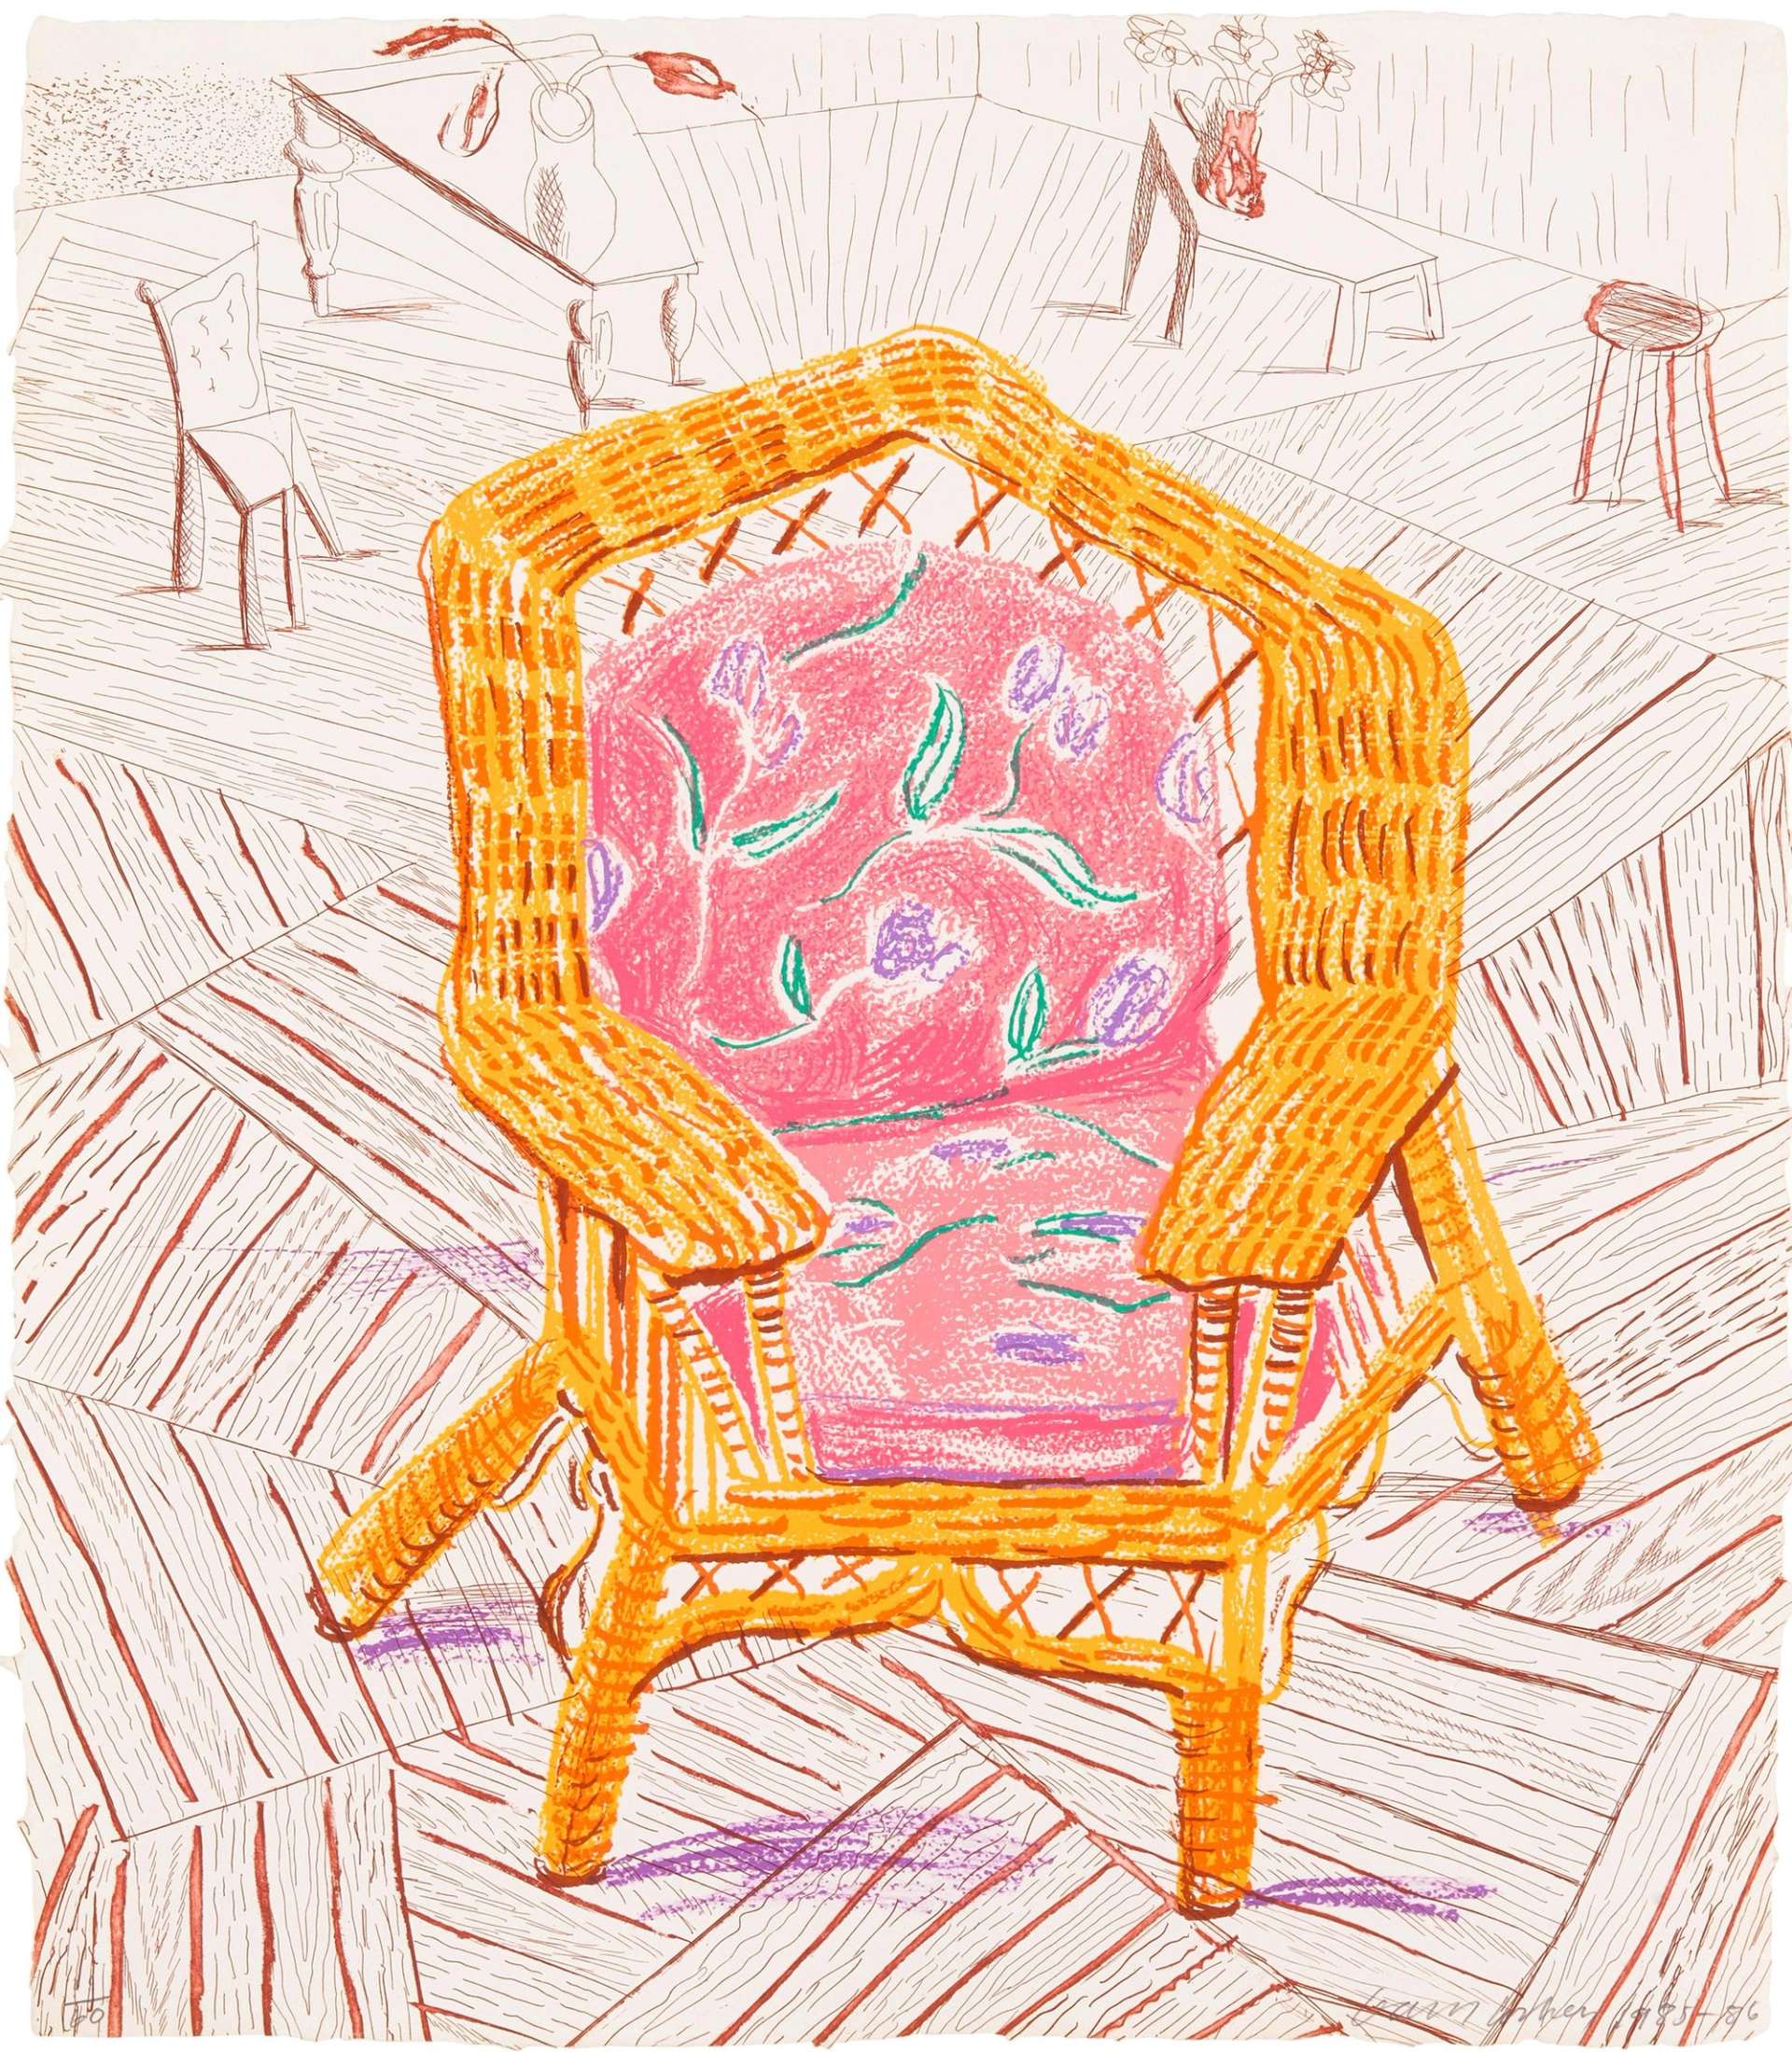 David Hockney’s Number One Chair. A lithographic print of a wicker chair with pink, floral cushions within an interior setting of hardwood floors, surrounded by accent furniture. 